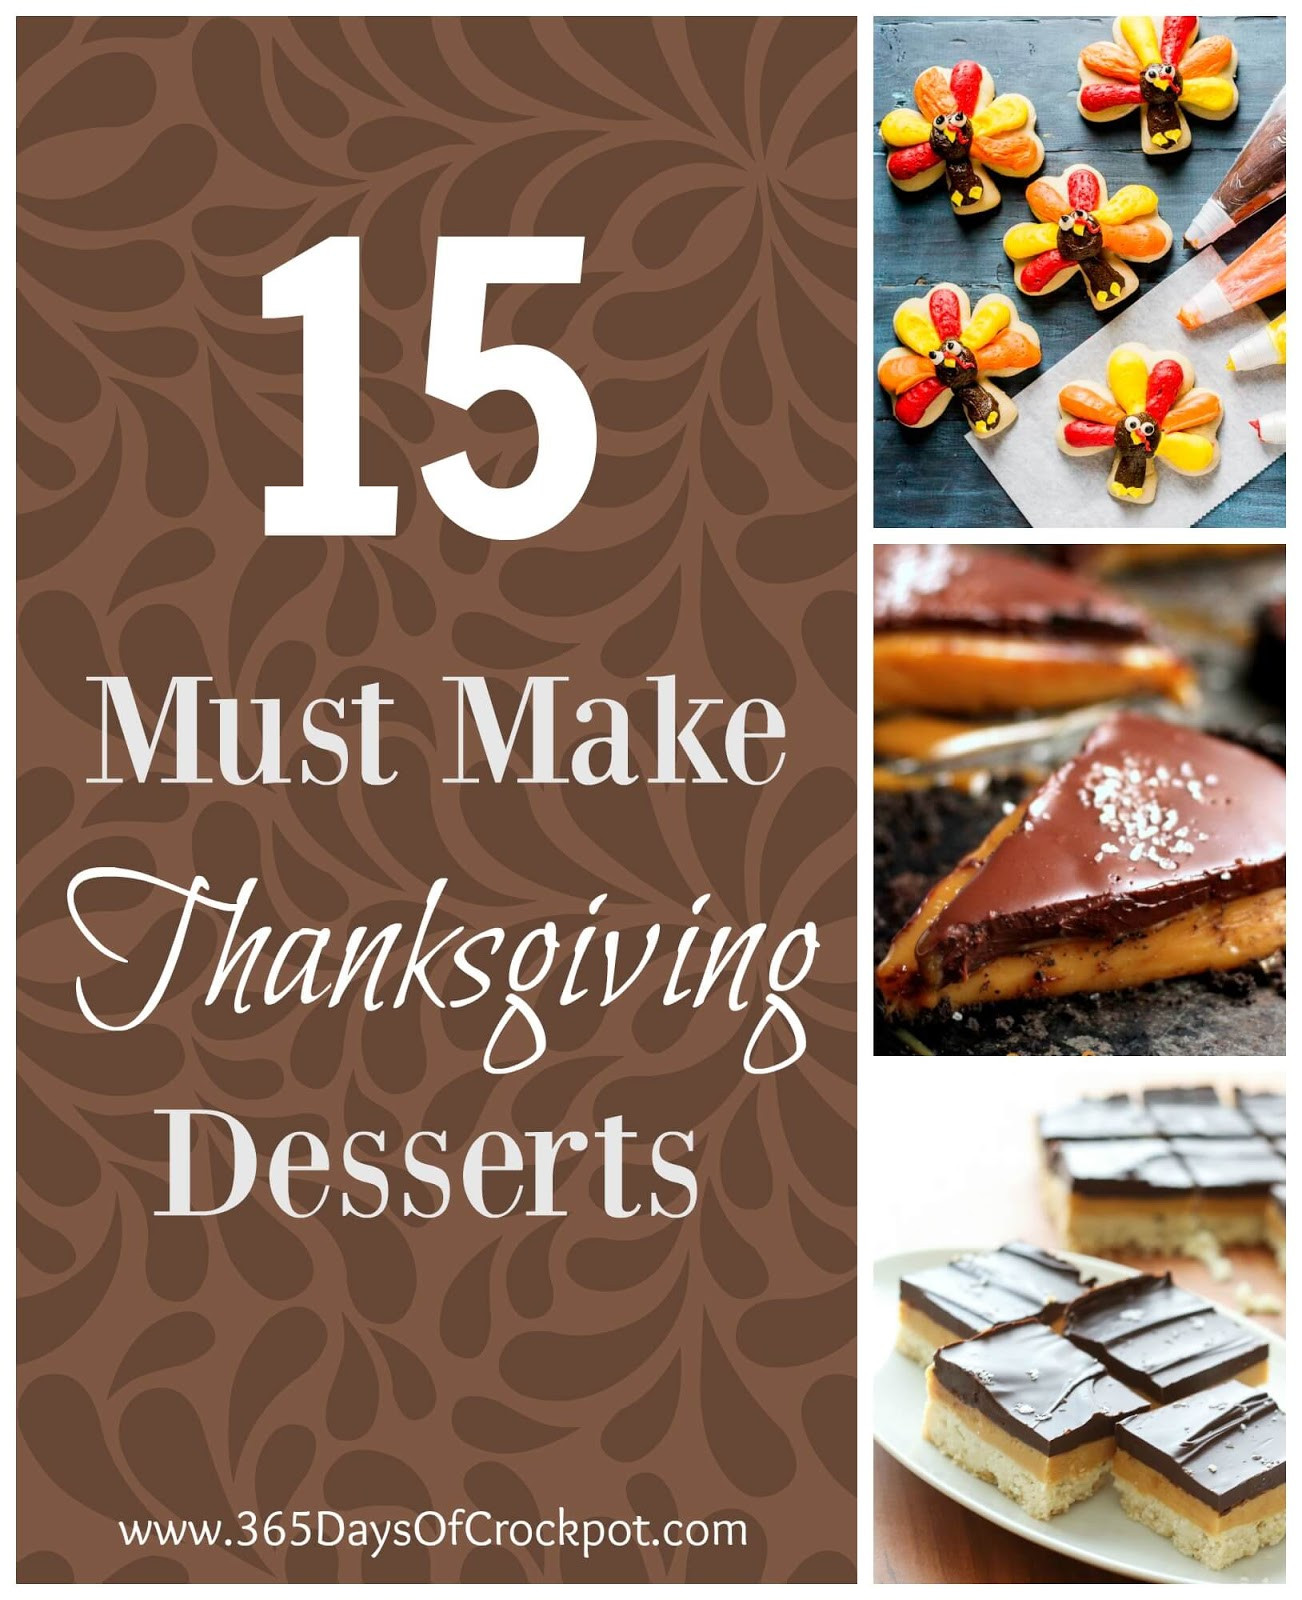 Good Pies For Thanksgiving
 15 Must Make Thanksgiving Desserts 365 Days of Slow